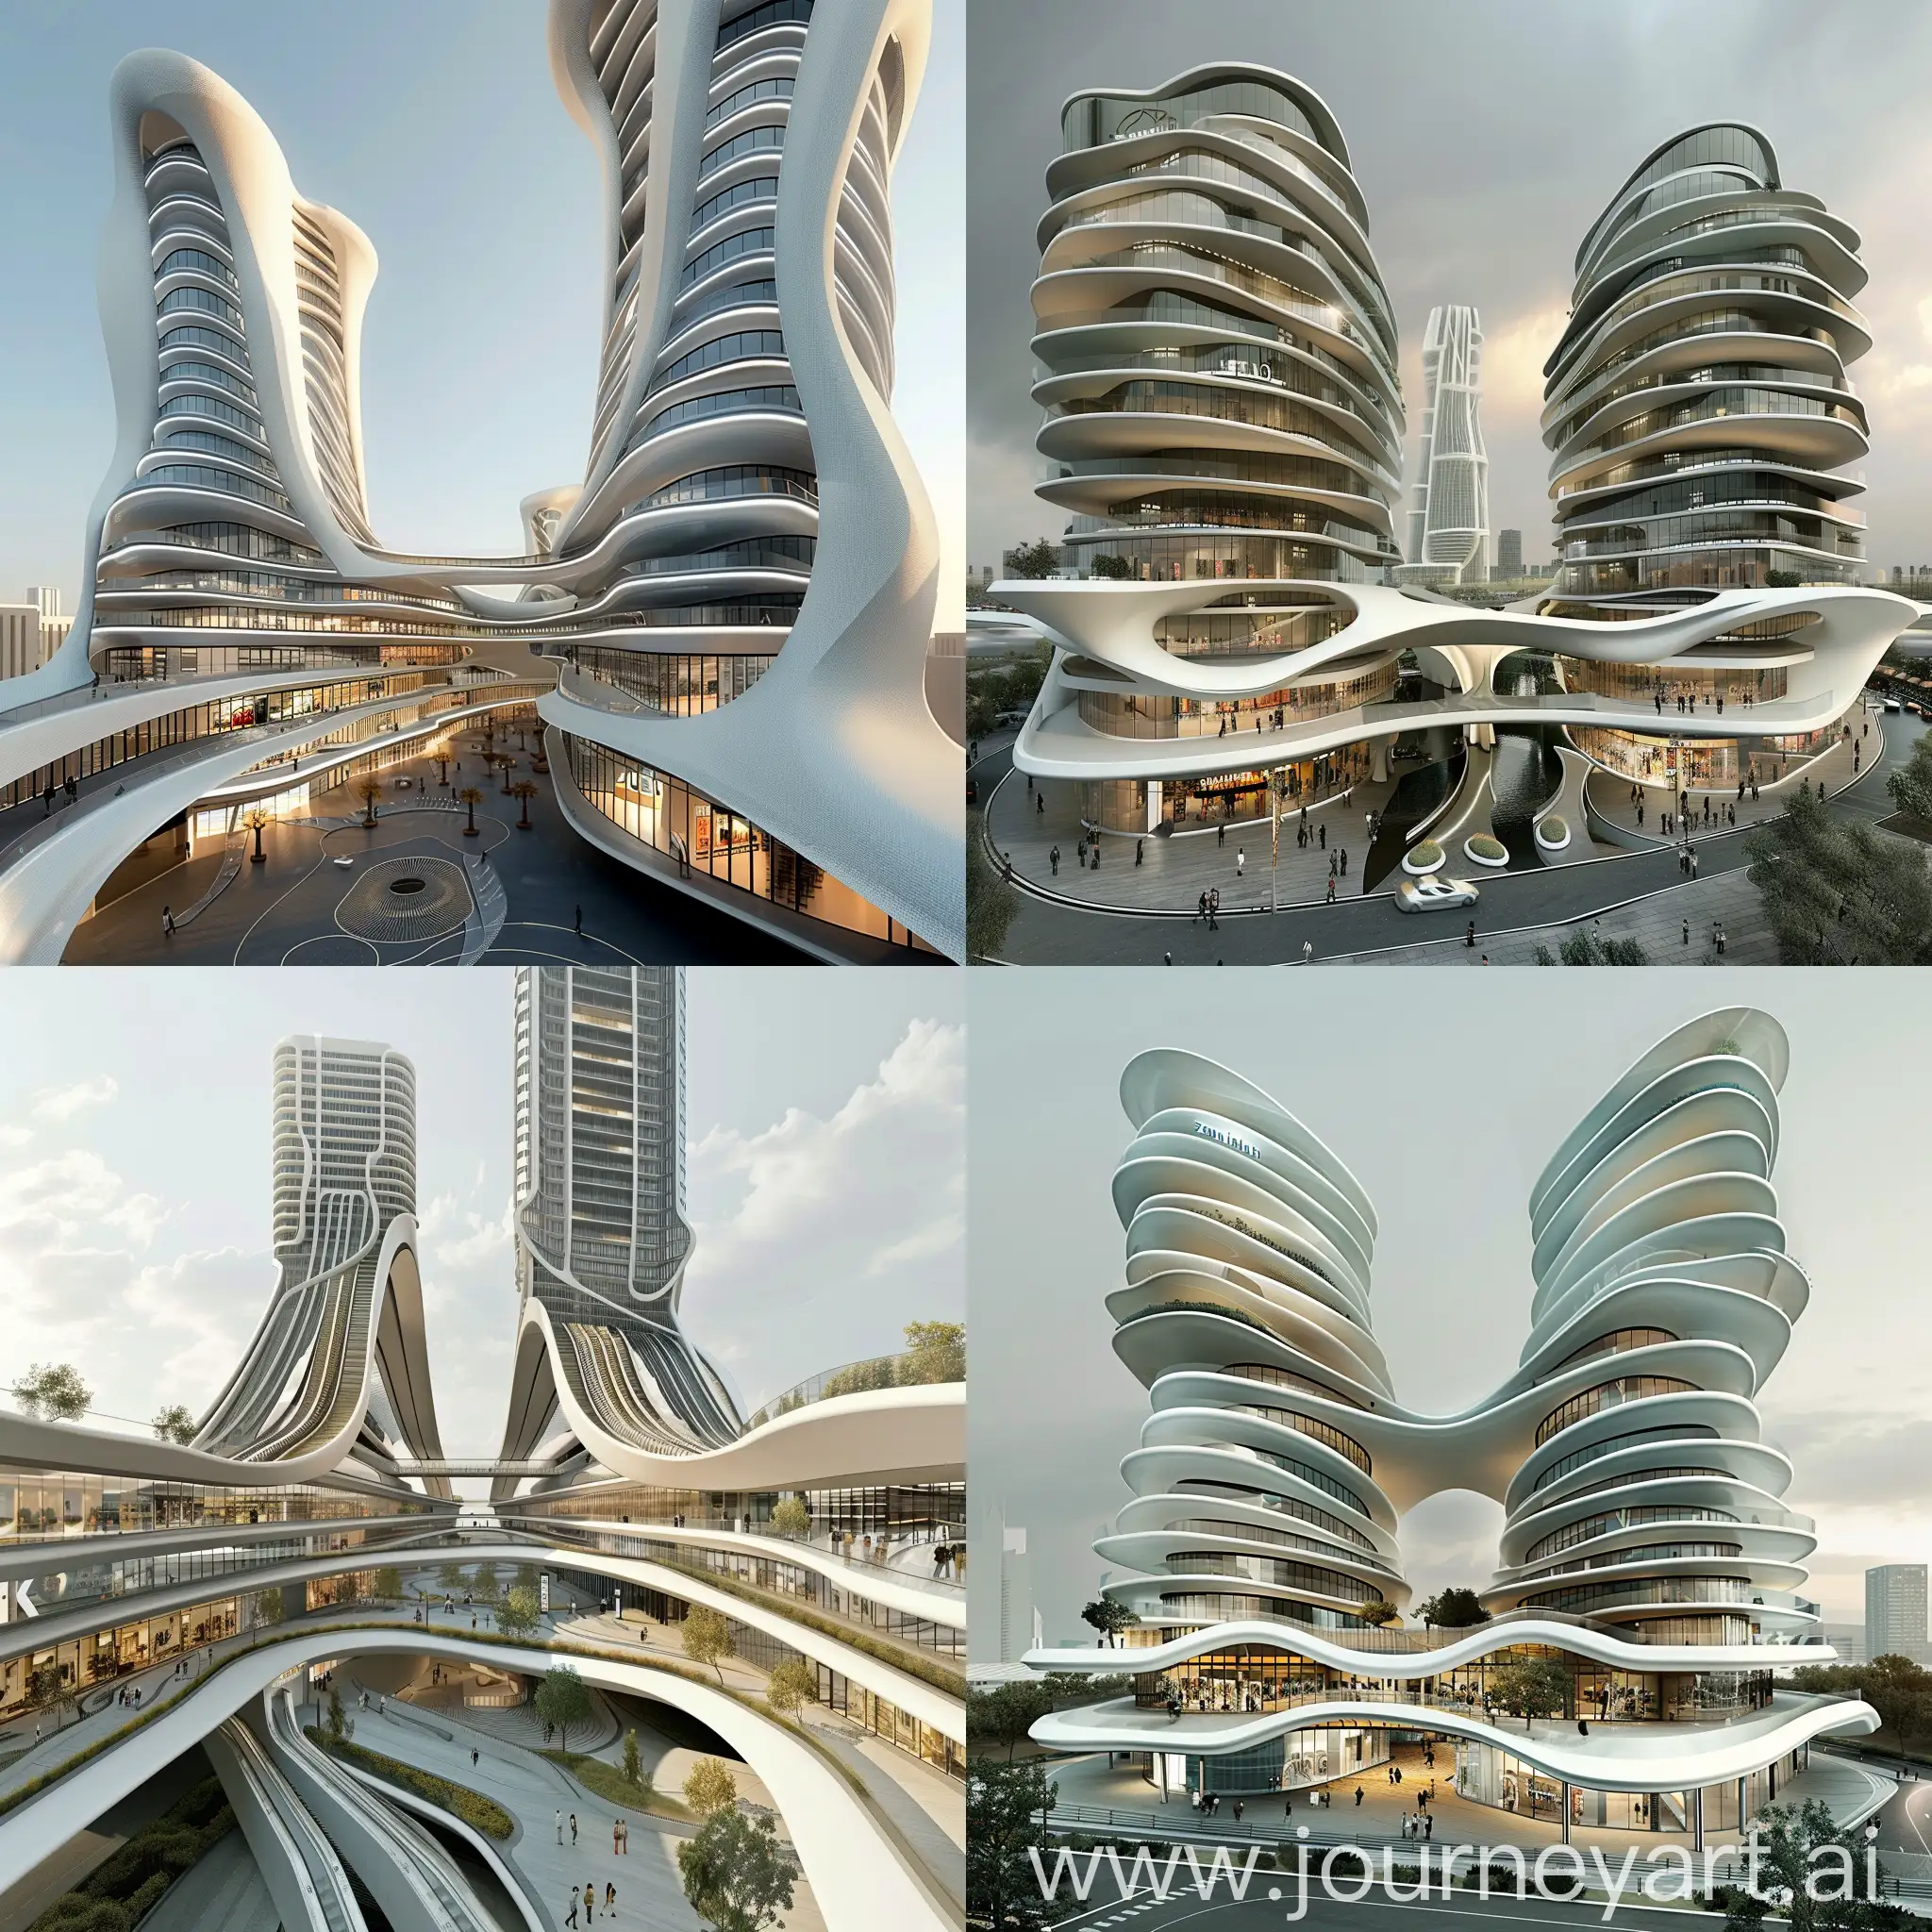 Modern-Hybrid-Shopping-Center-with-Zaha-Hadid-Inspired-Architecture